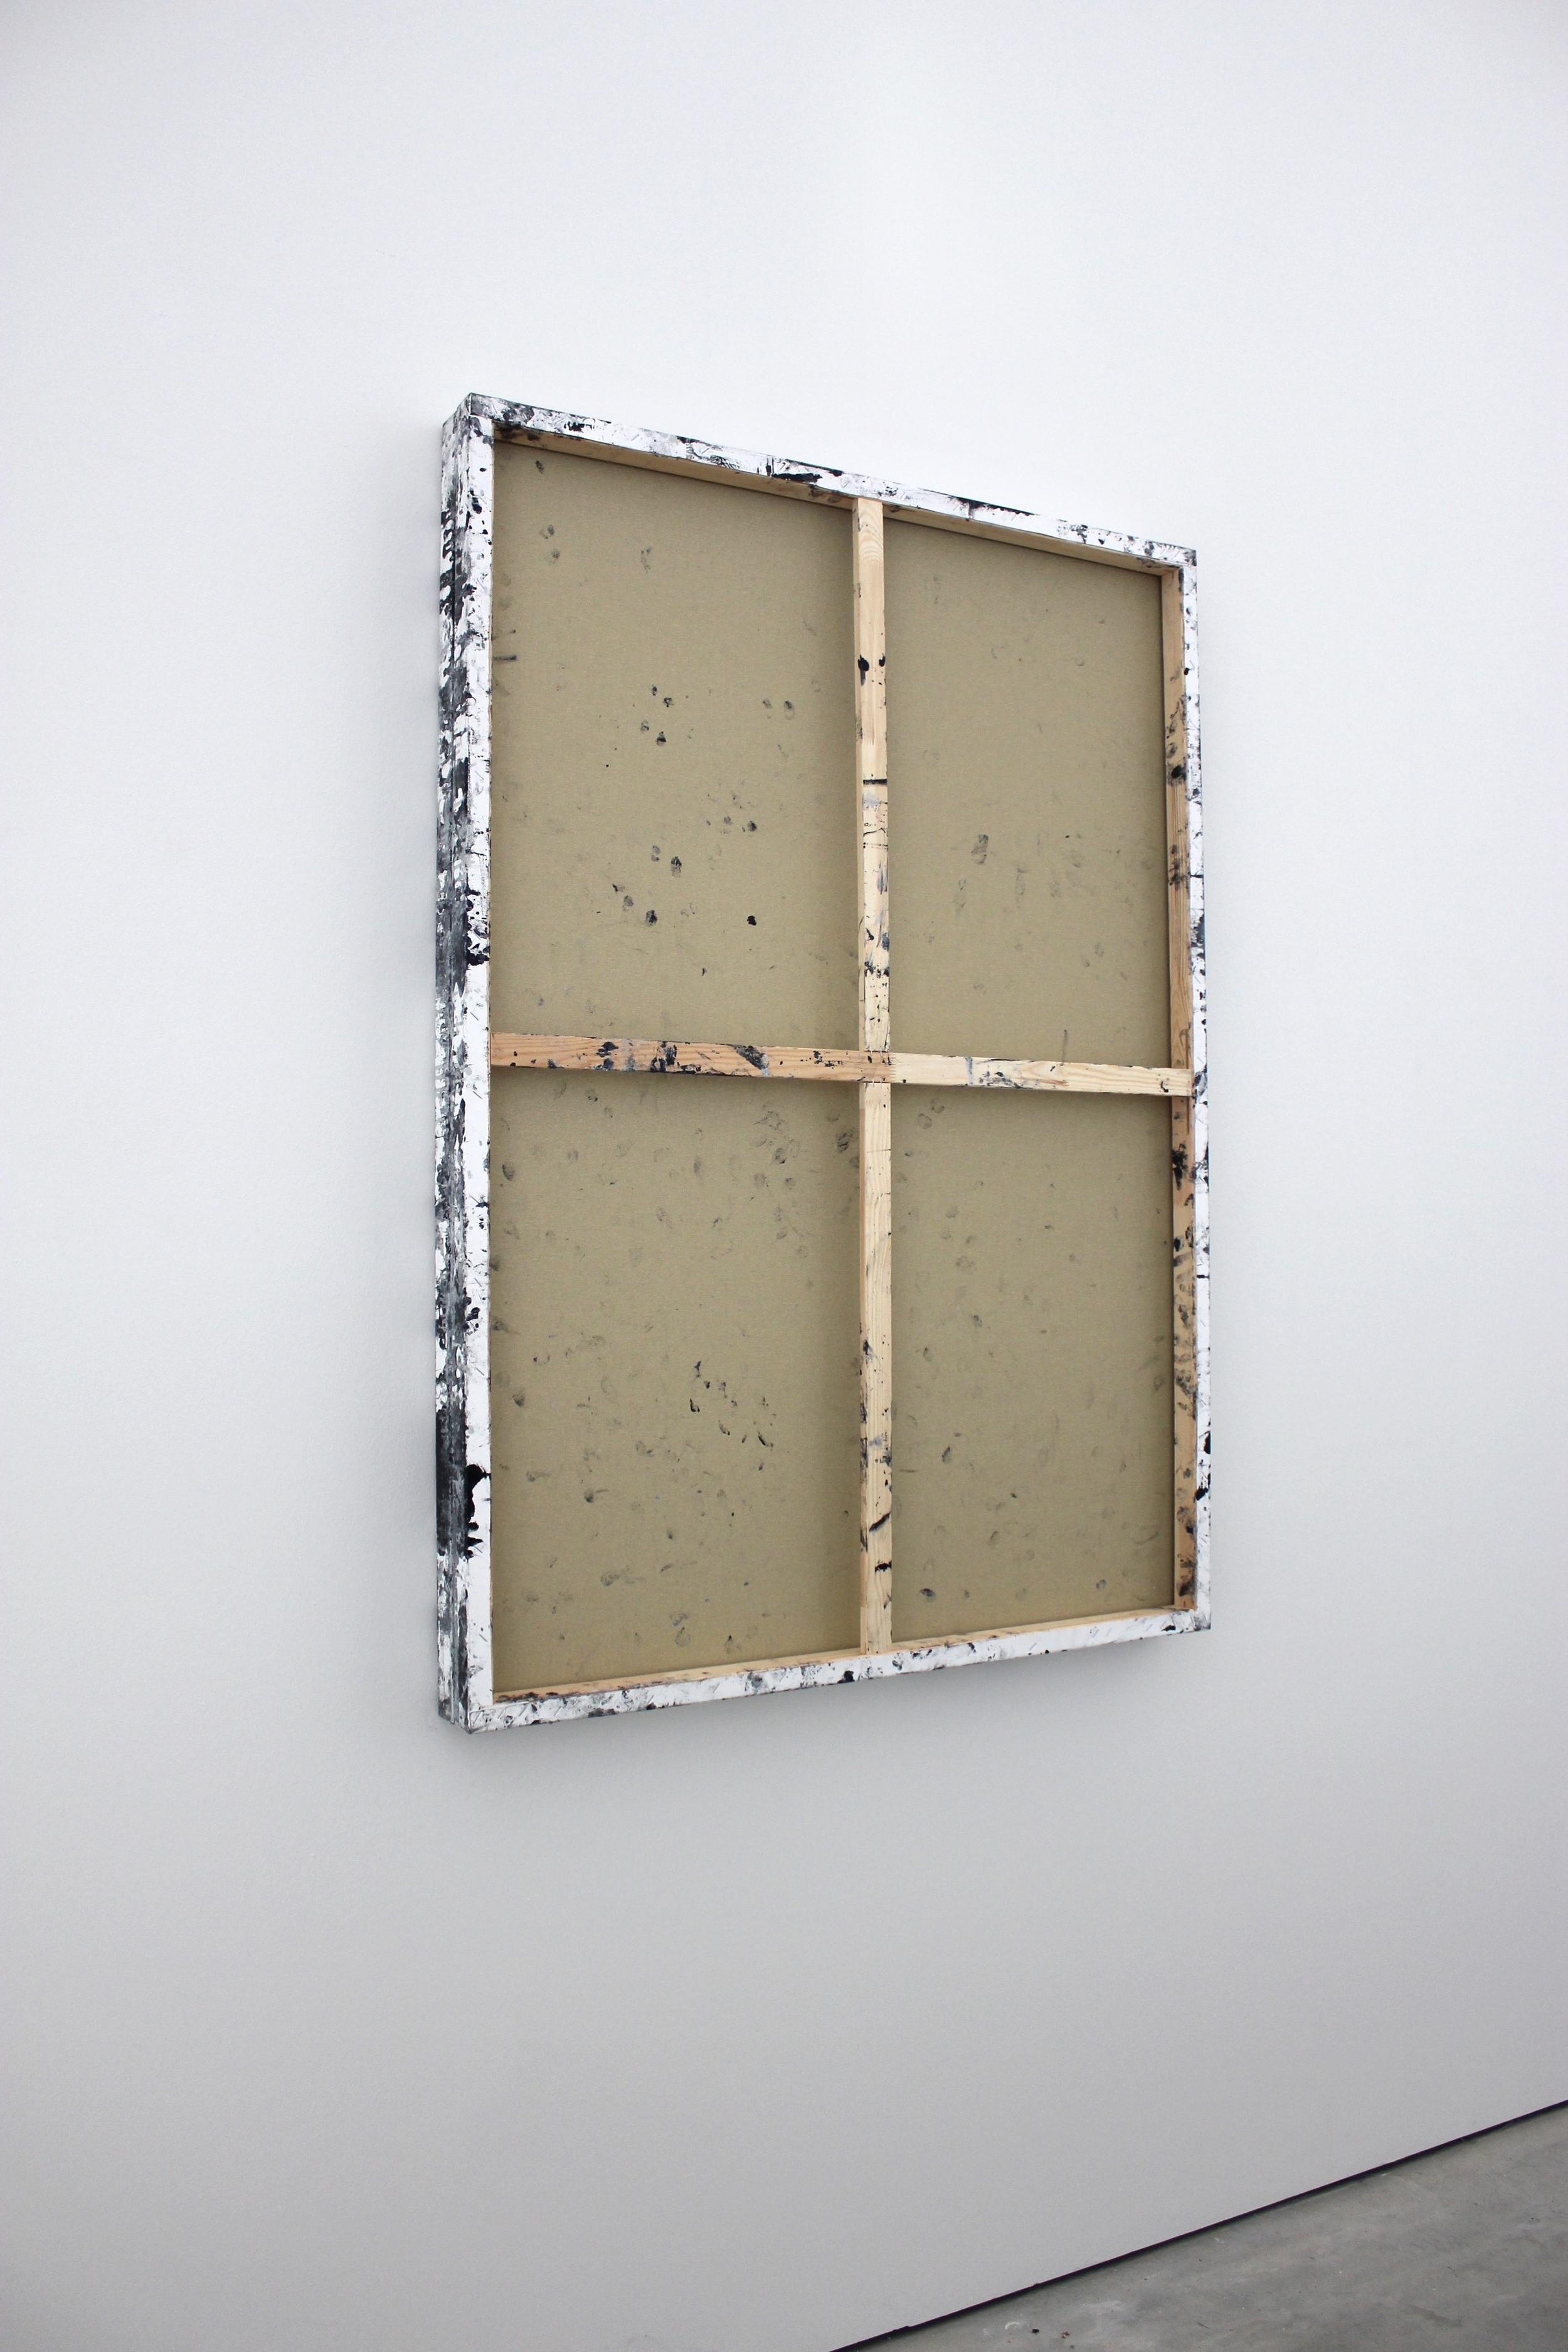  Intra #4 (Closed Painting) 2014 55 x 39.5 x 3.5 inches 